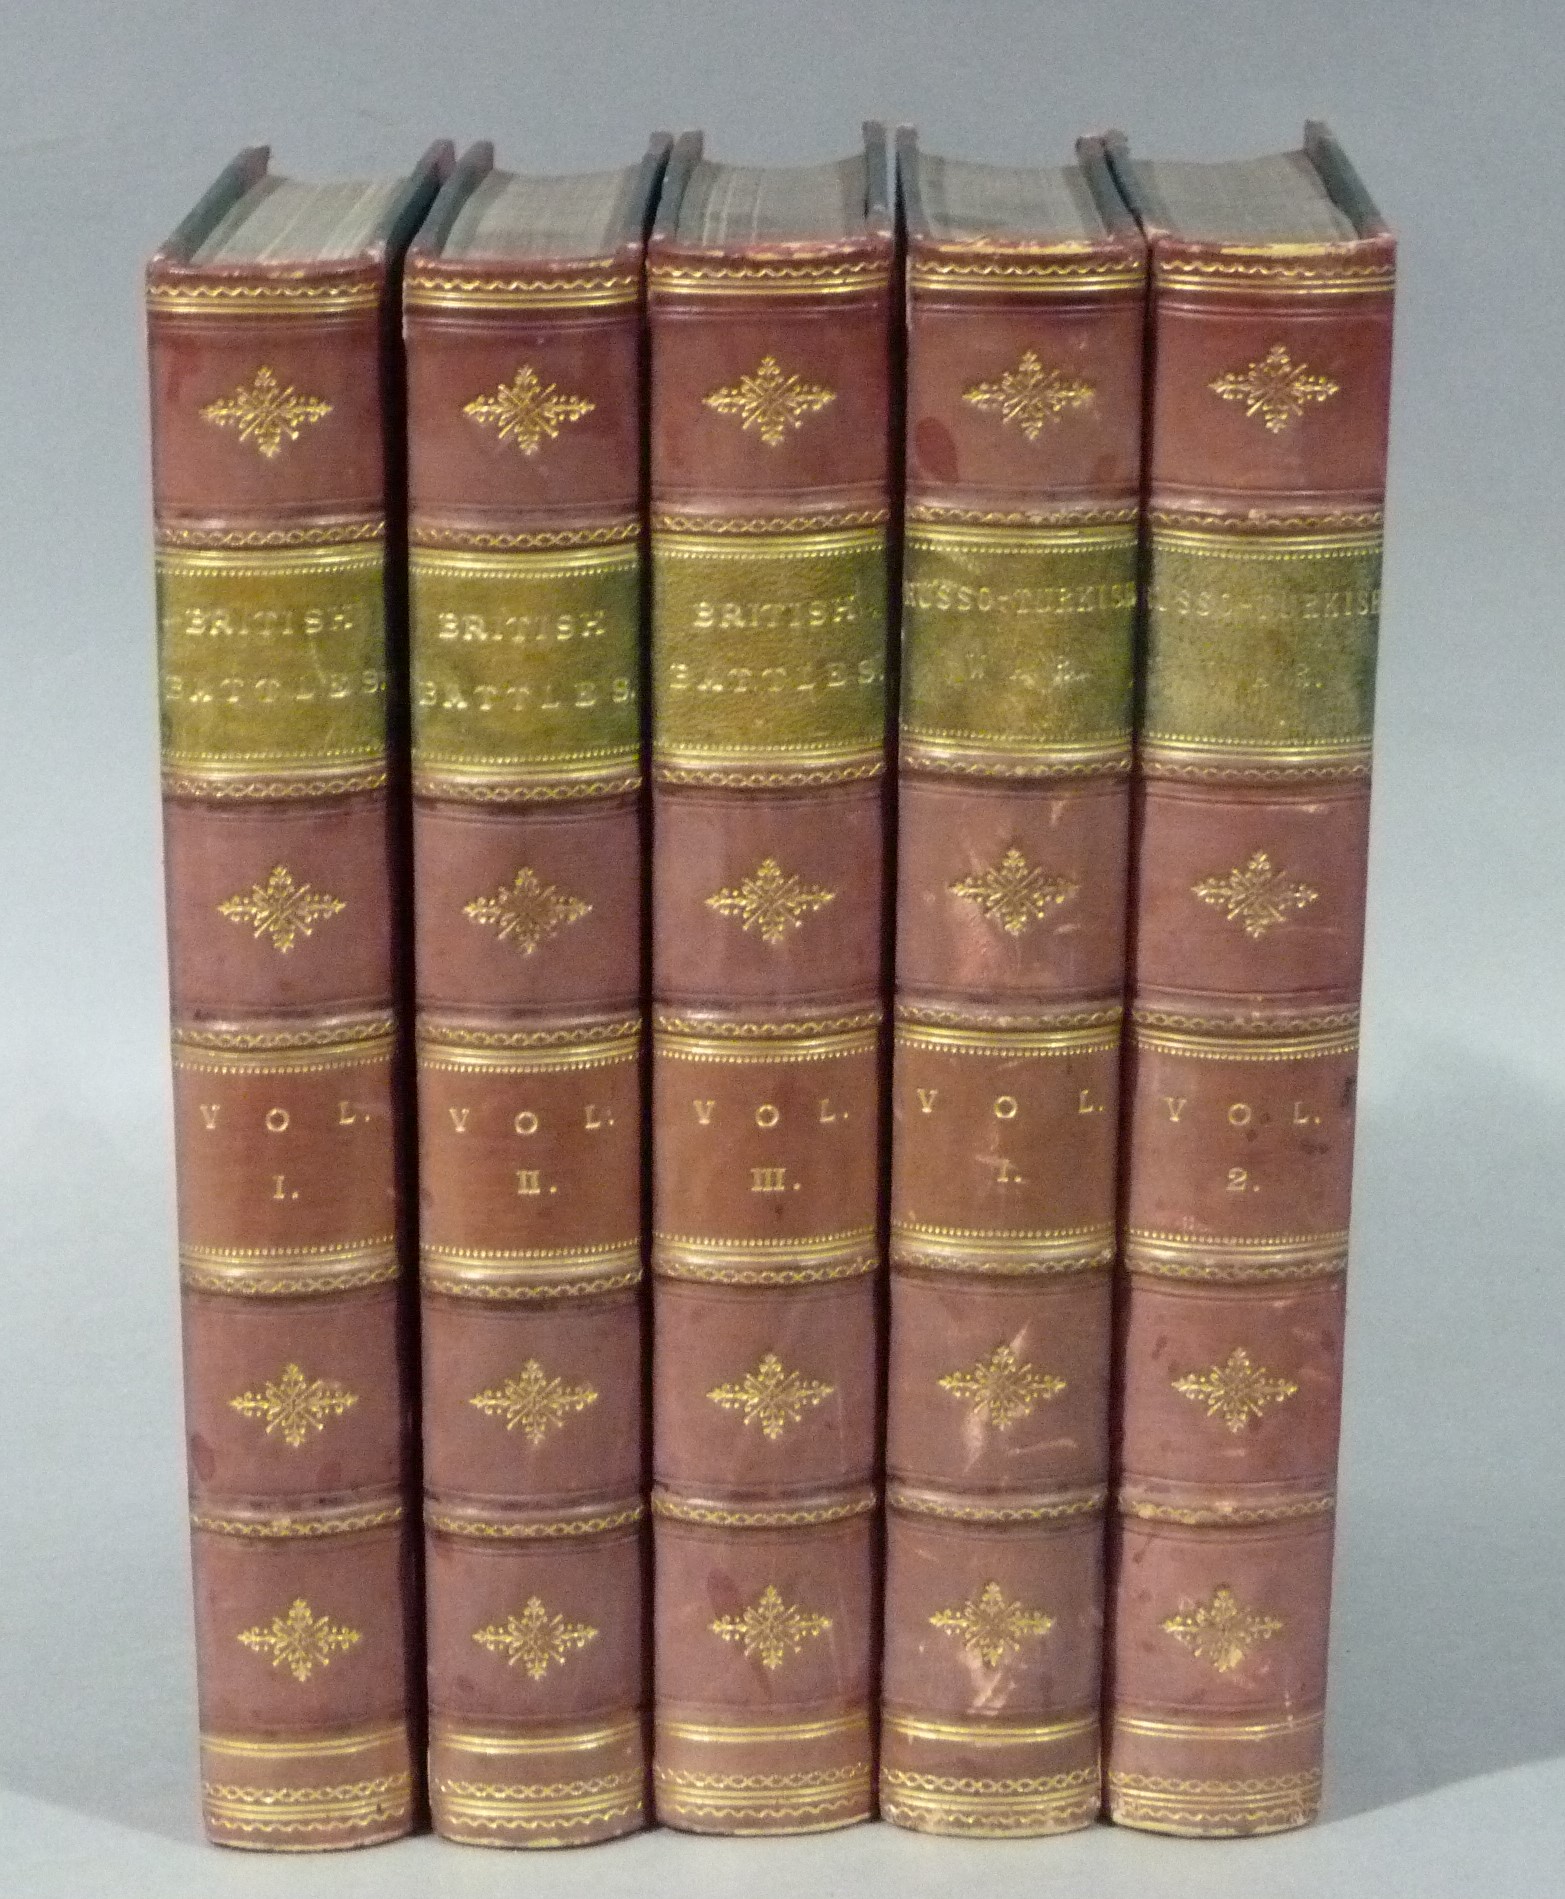 Grant, James - British Battles on Land and Sea. London, Cassell, Petter and Galpin, c1880s. 3